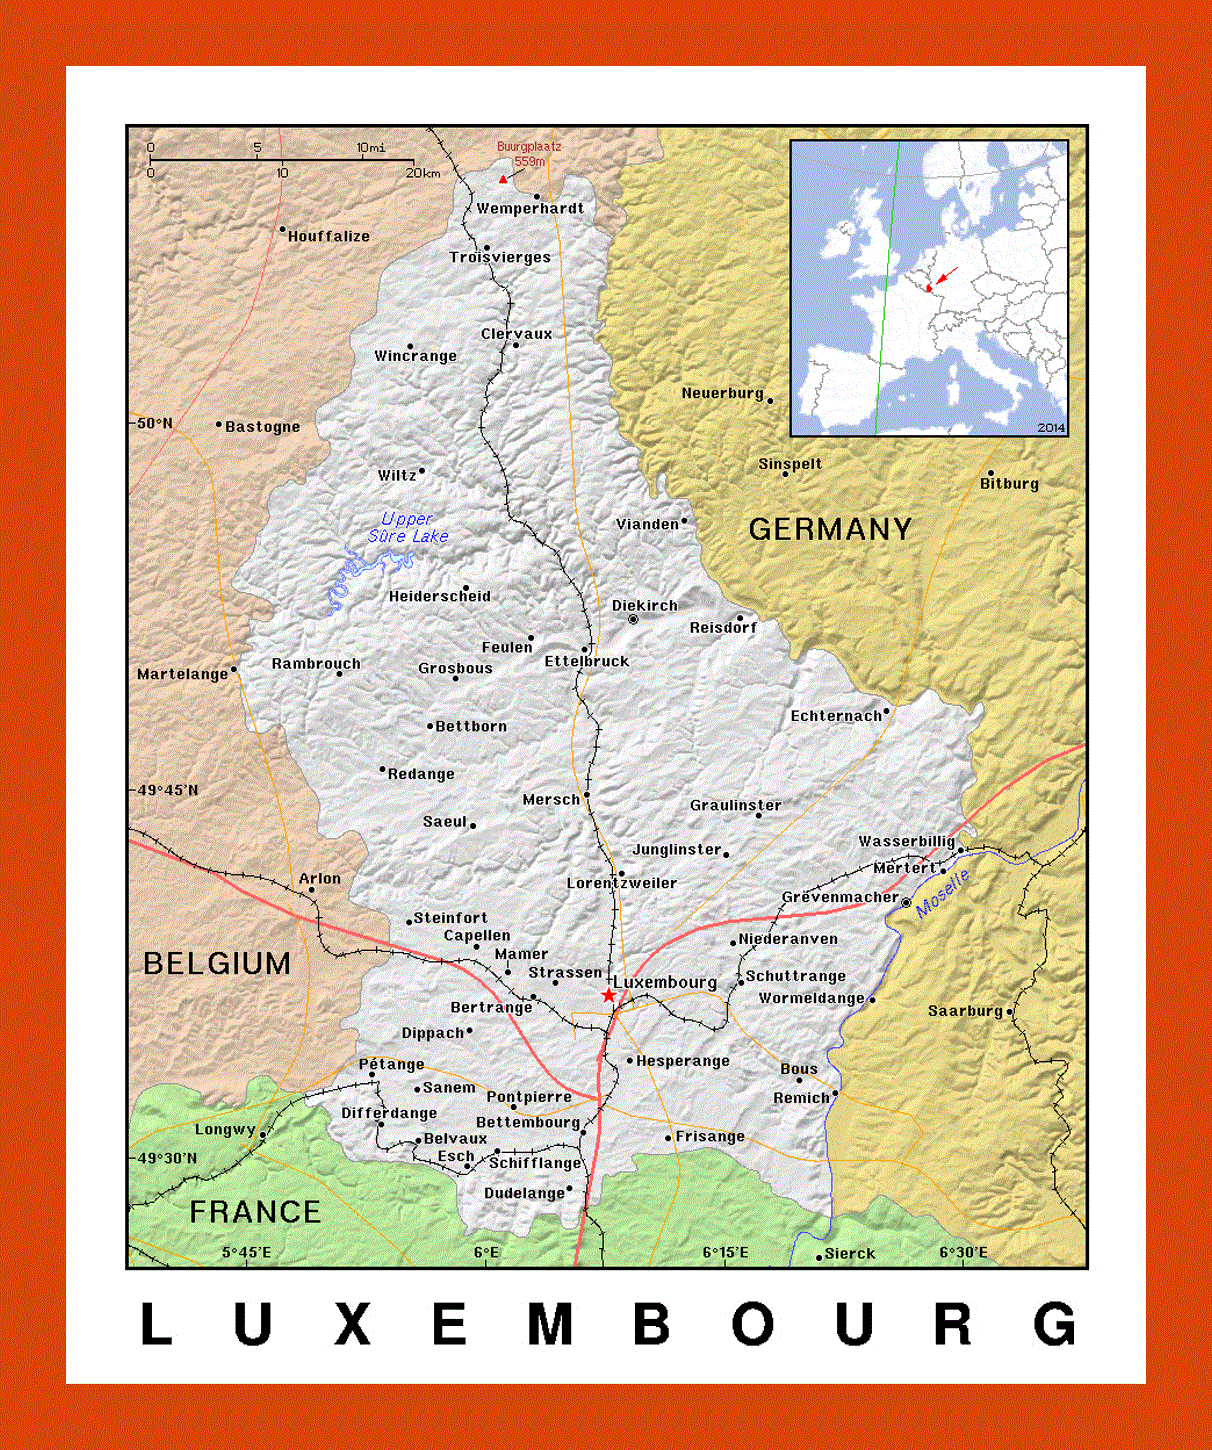 Political map of Luxembourg